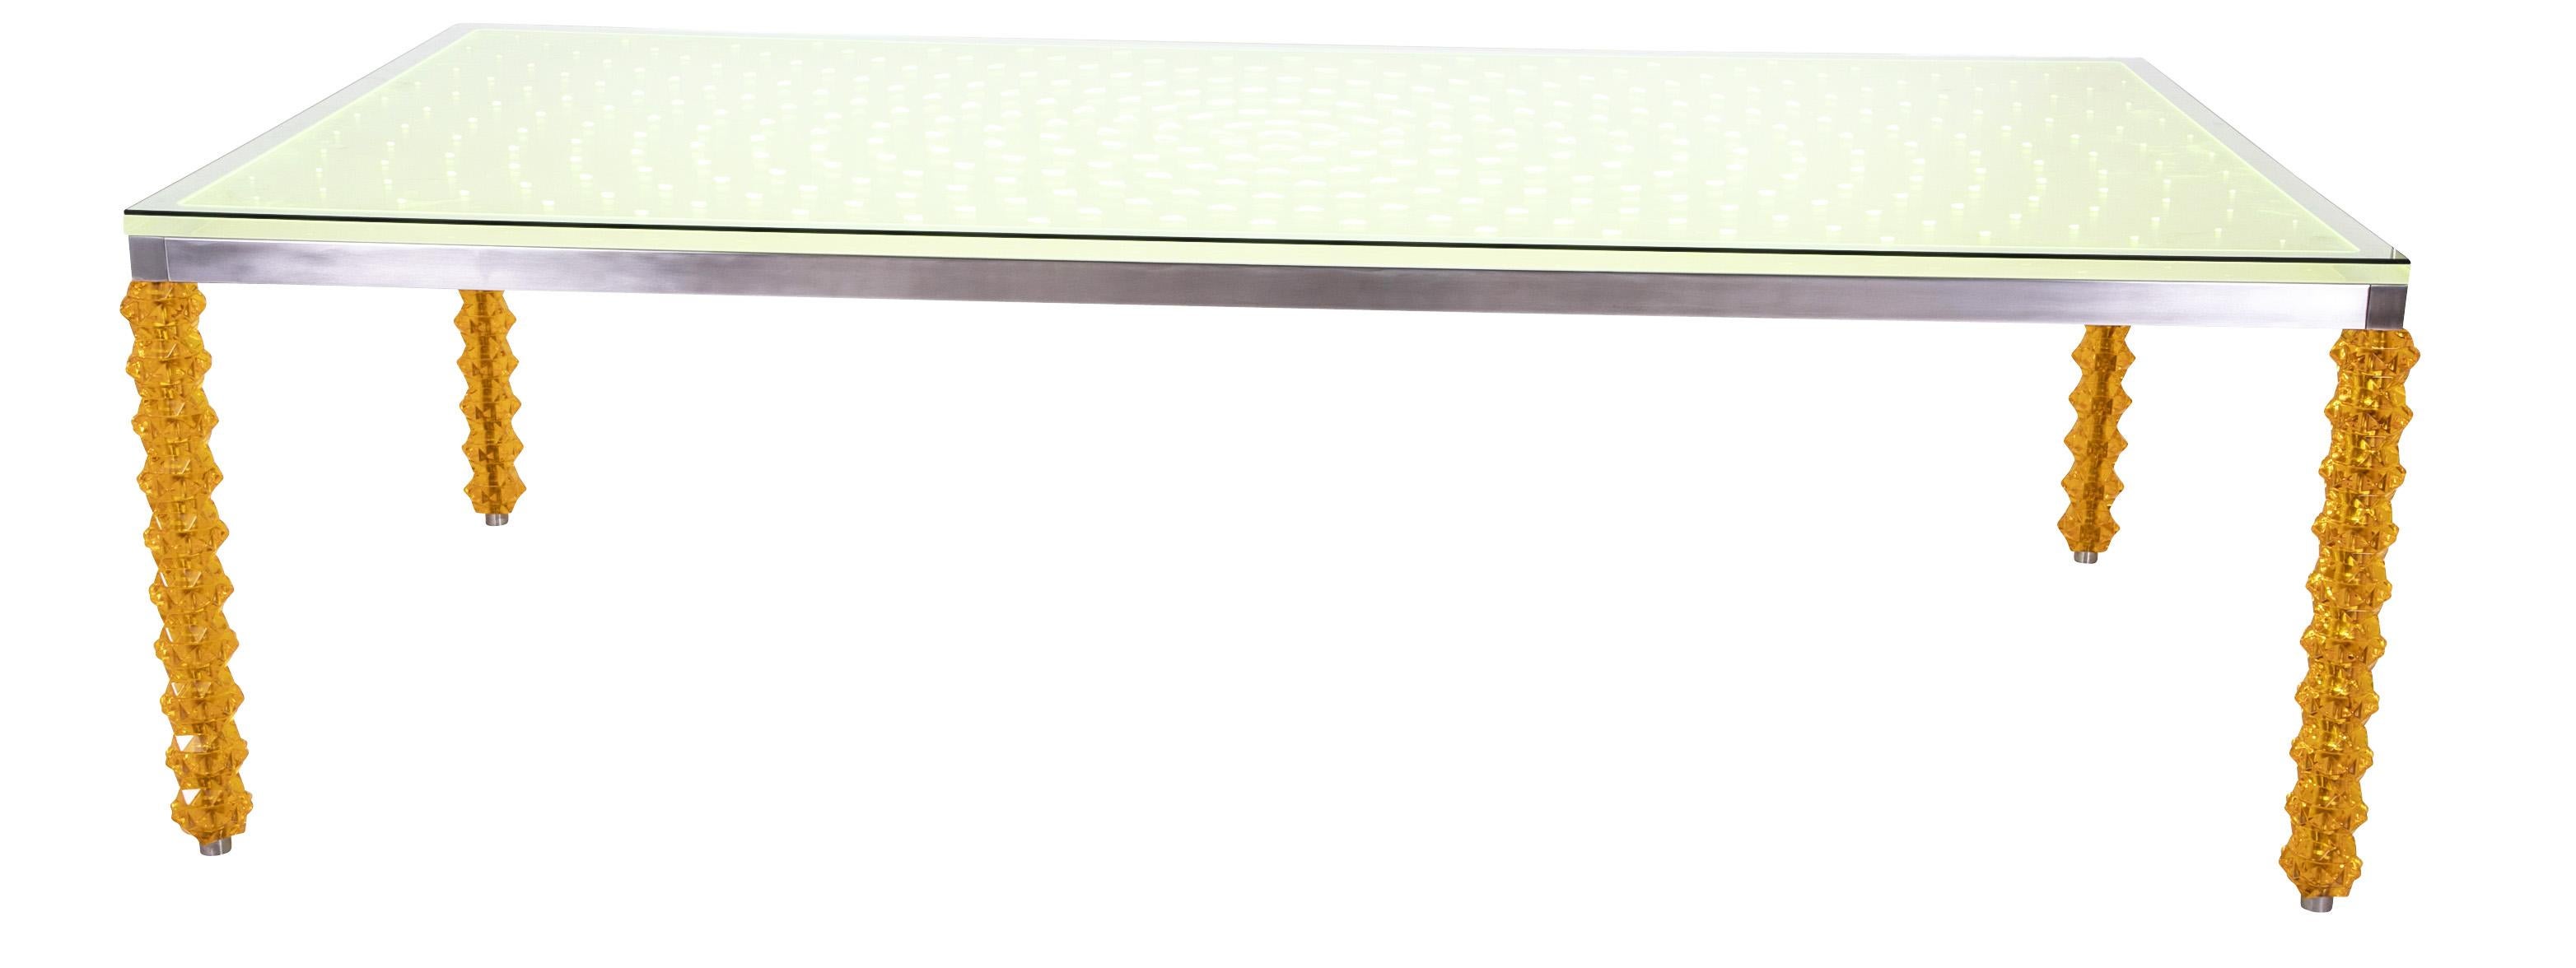 American Dining Table Designed by Sawaya & Moroni in Stainless Steel and Lucite For Sale